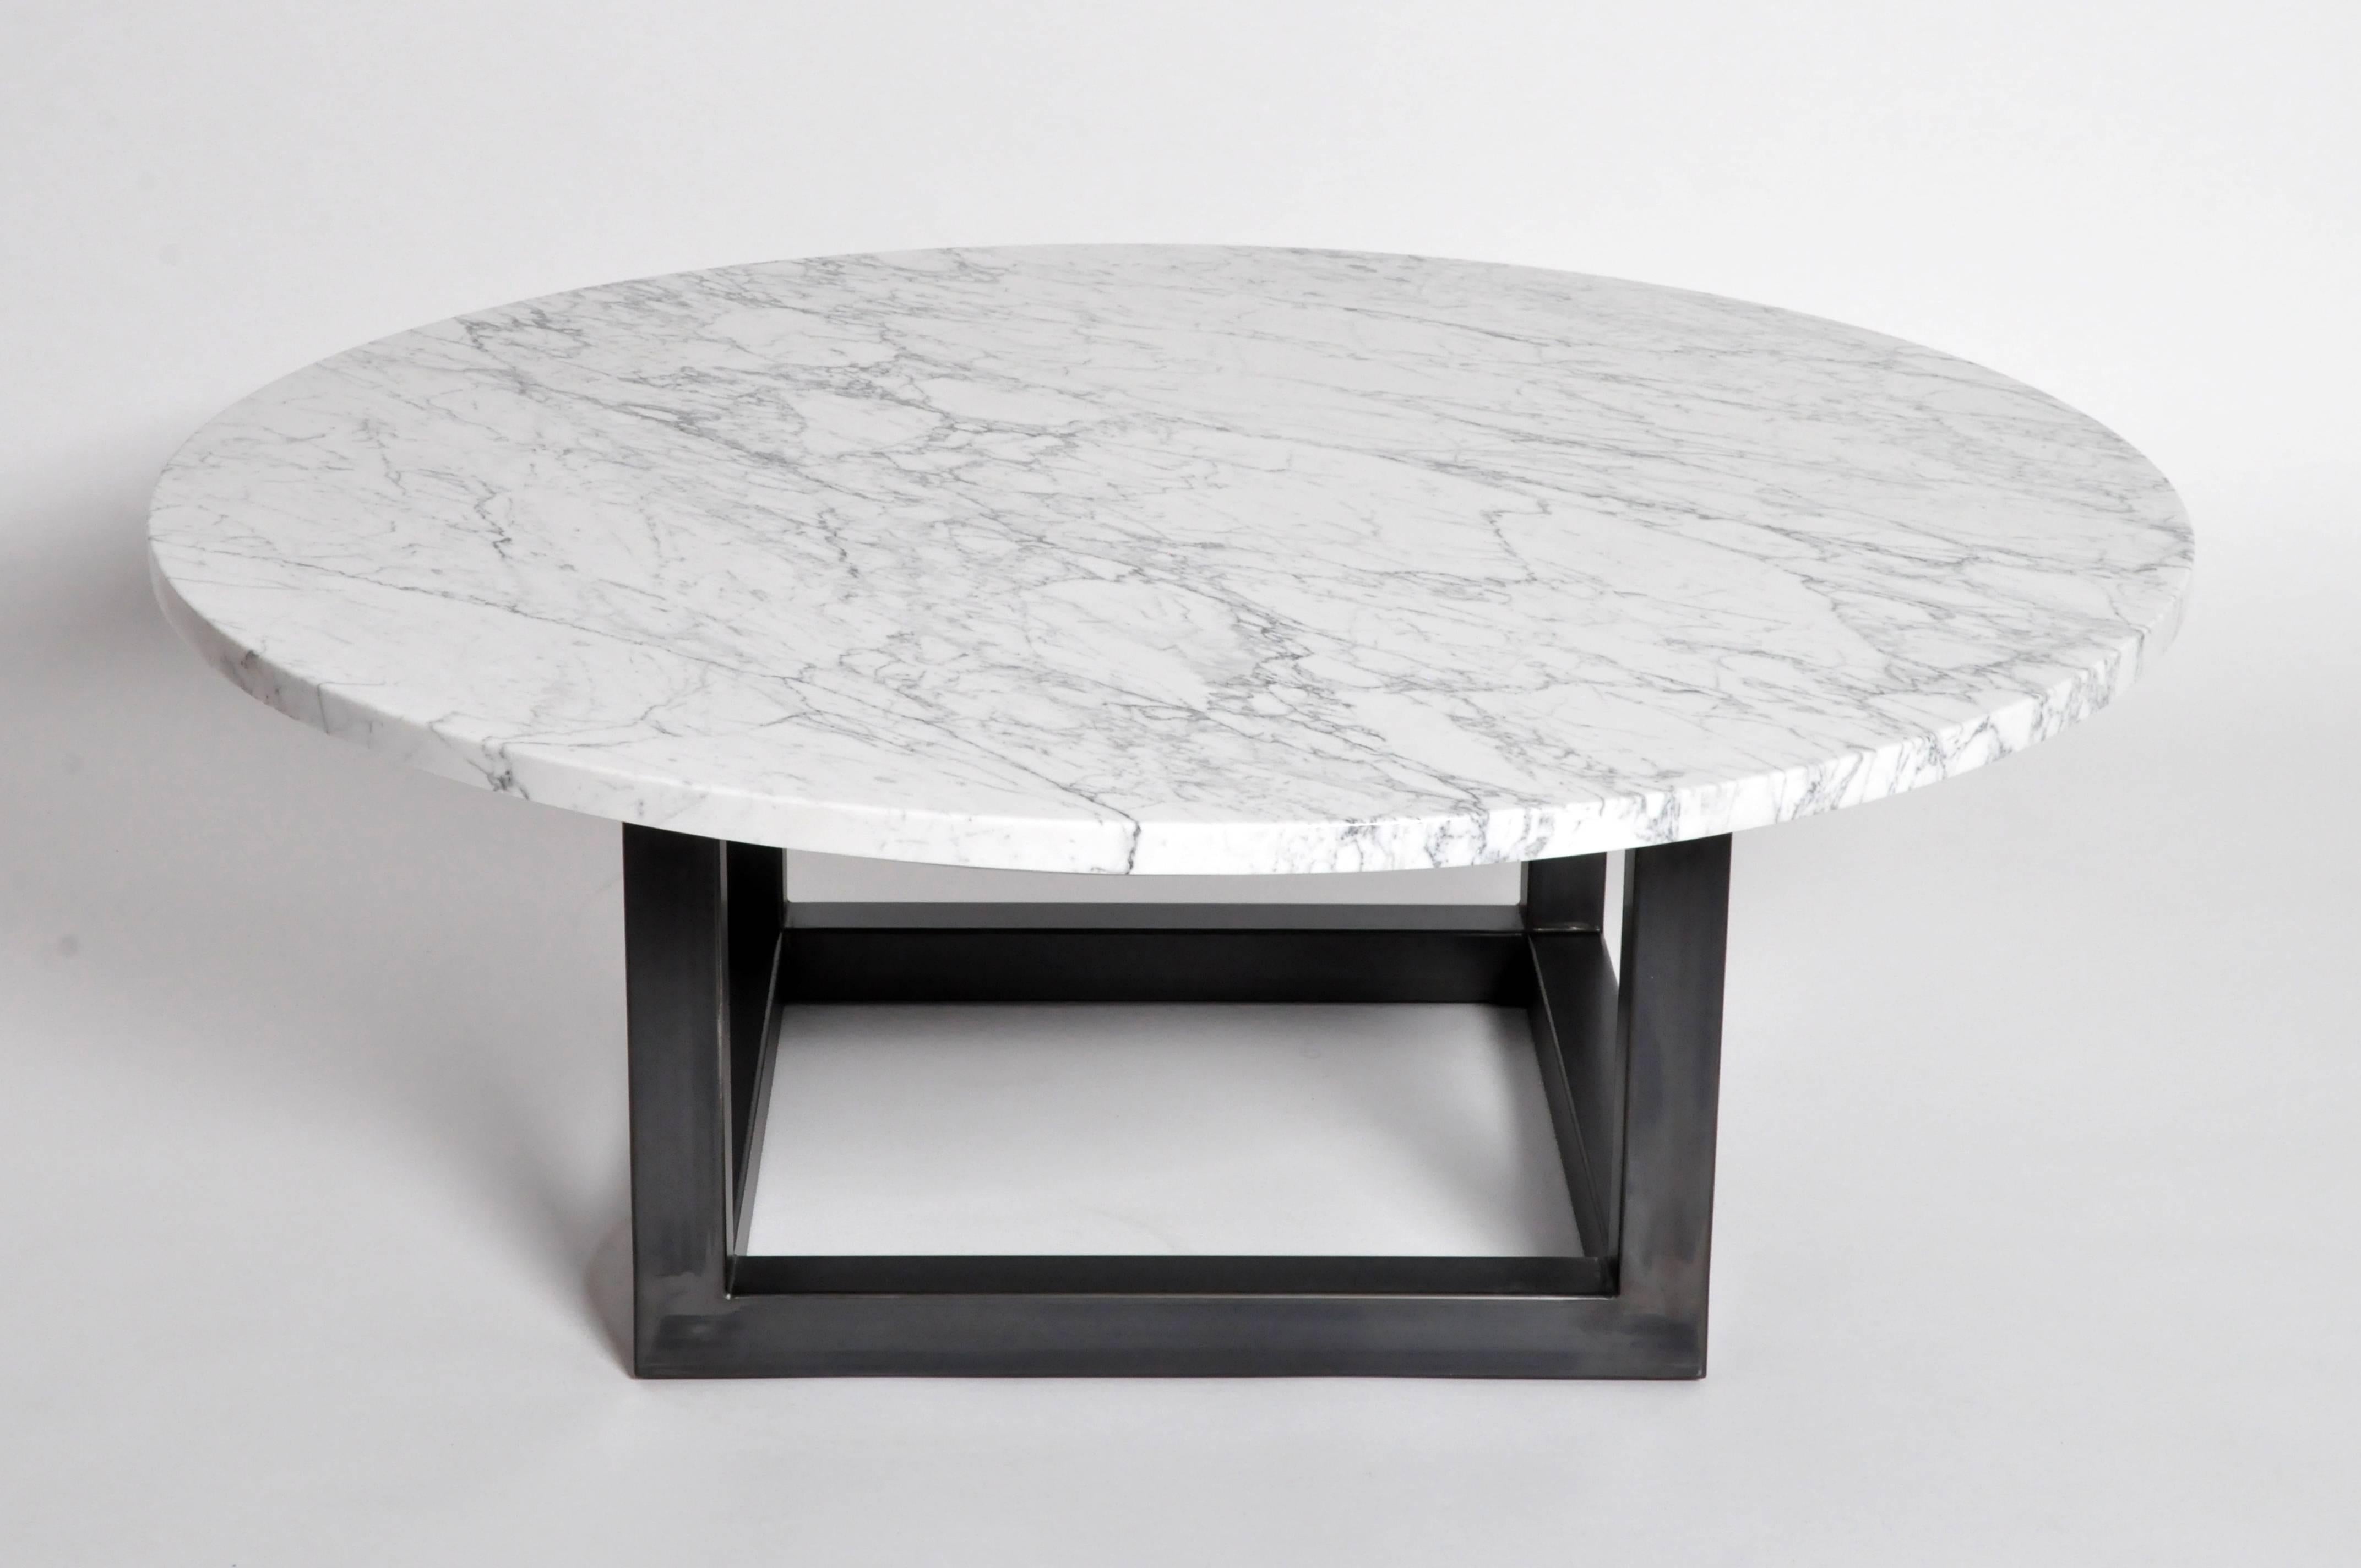 This impressive round marble coffee table is made in the USA and is made from marble and steel.